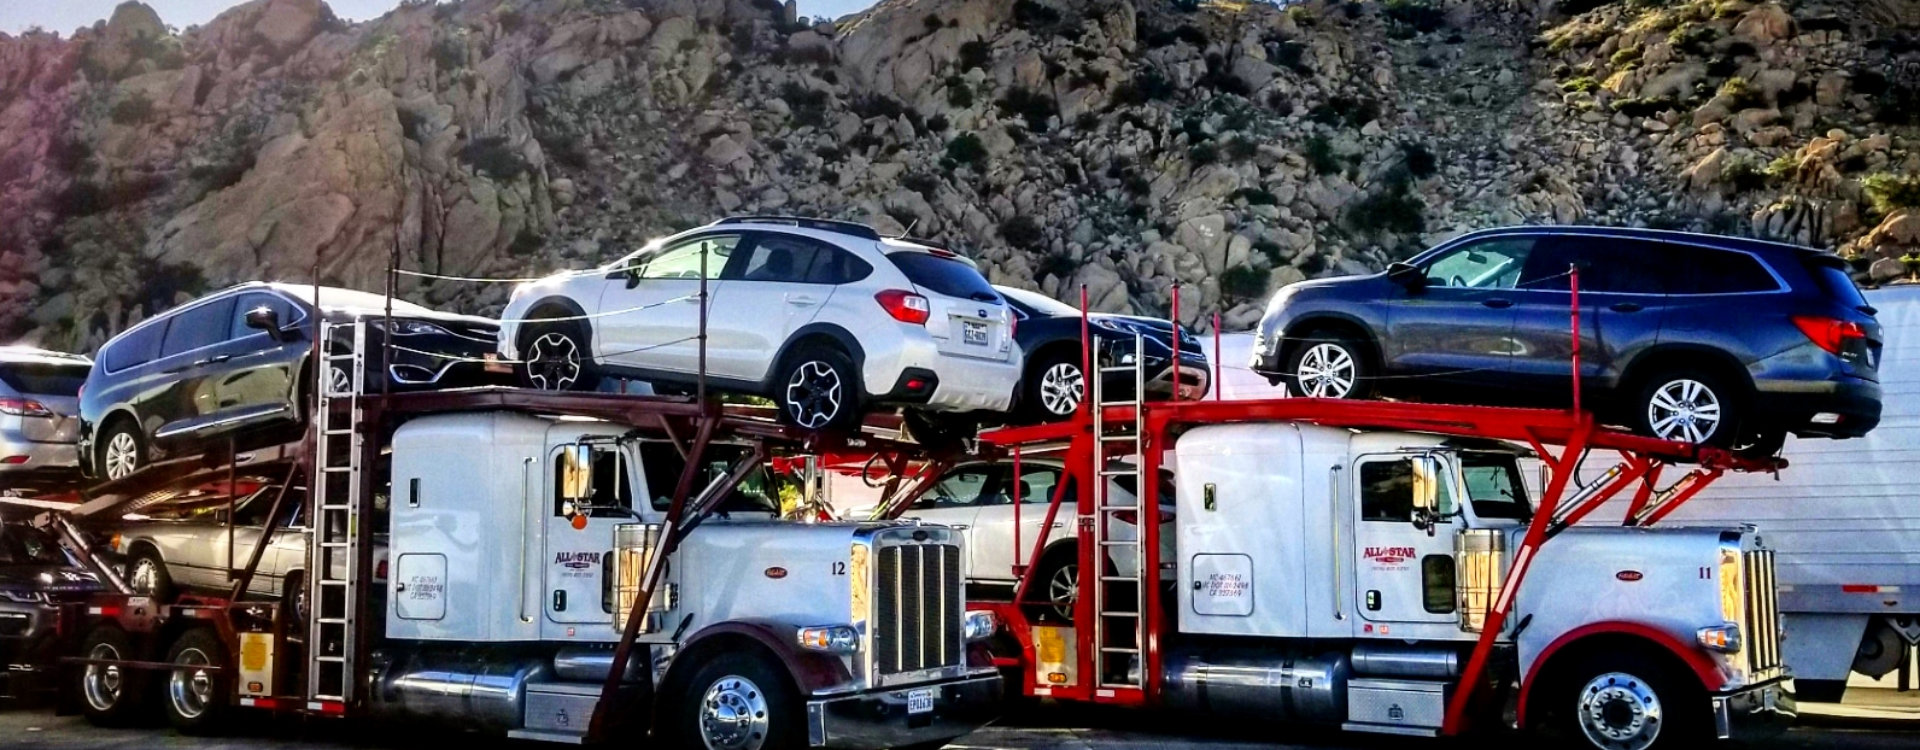 two trailer truck loaded with cars